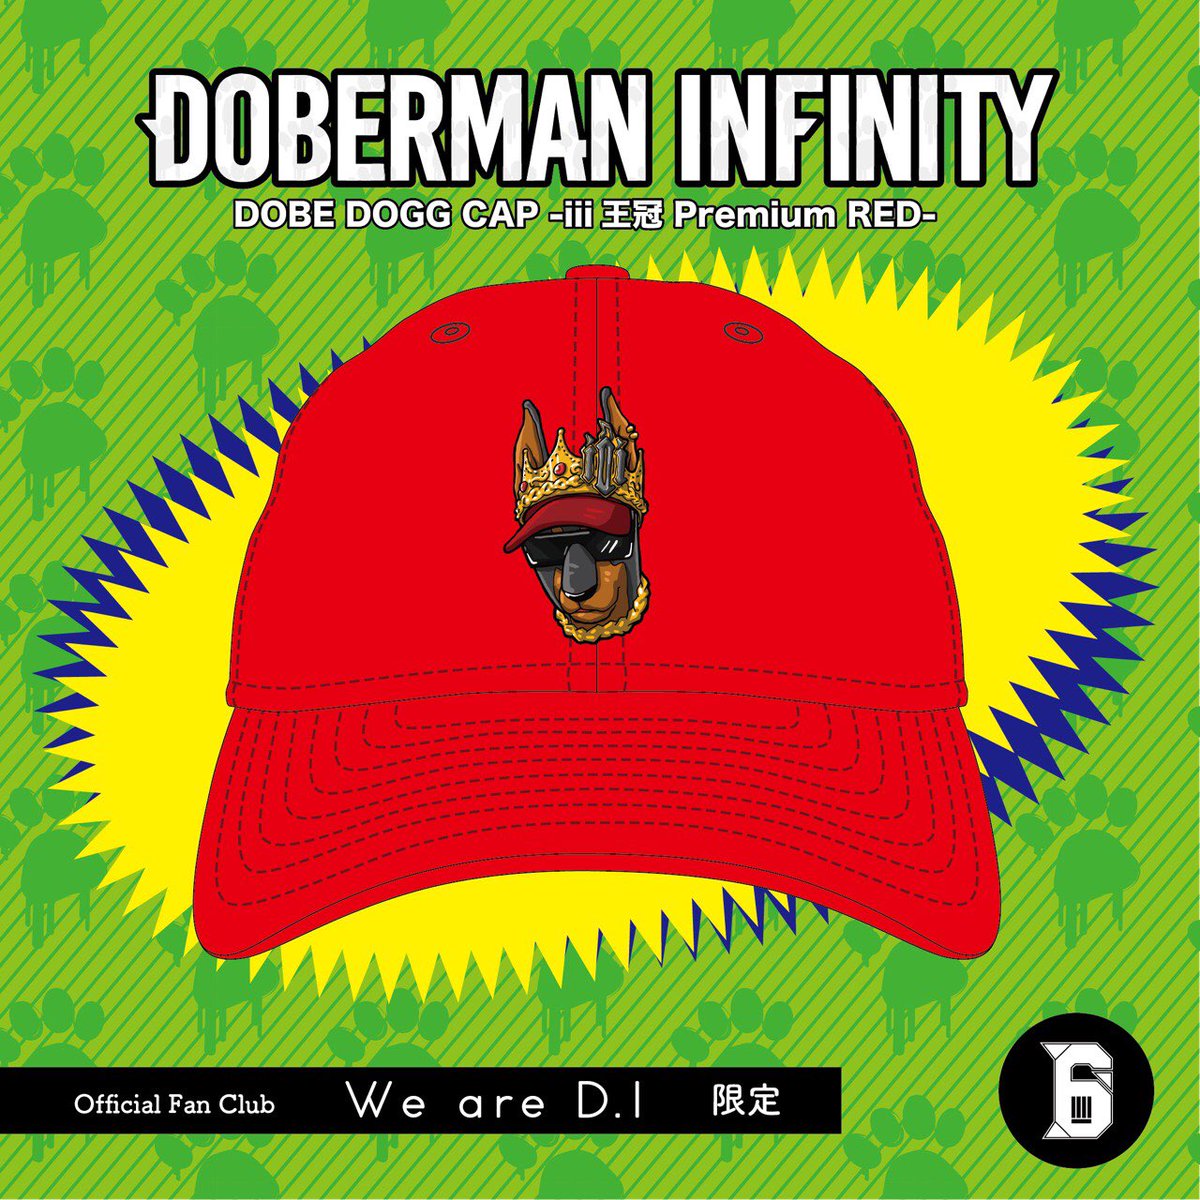 Doberman Infinity オフィシャルファンクラブ We Are D I 情報 Dobe Dogg Cap We Are D I限定カラーの受注販売が決定 We Are D I会員限定exile Tribe Stationにて受注販売受付中 詳細は T Co Y1wy75m1fx T Co 5h2qwl4w9h